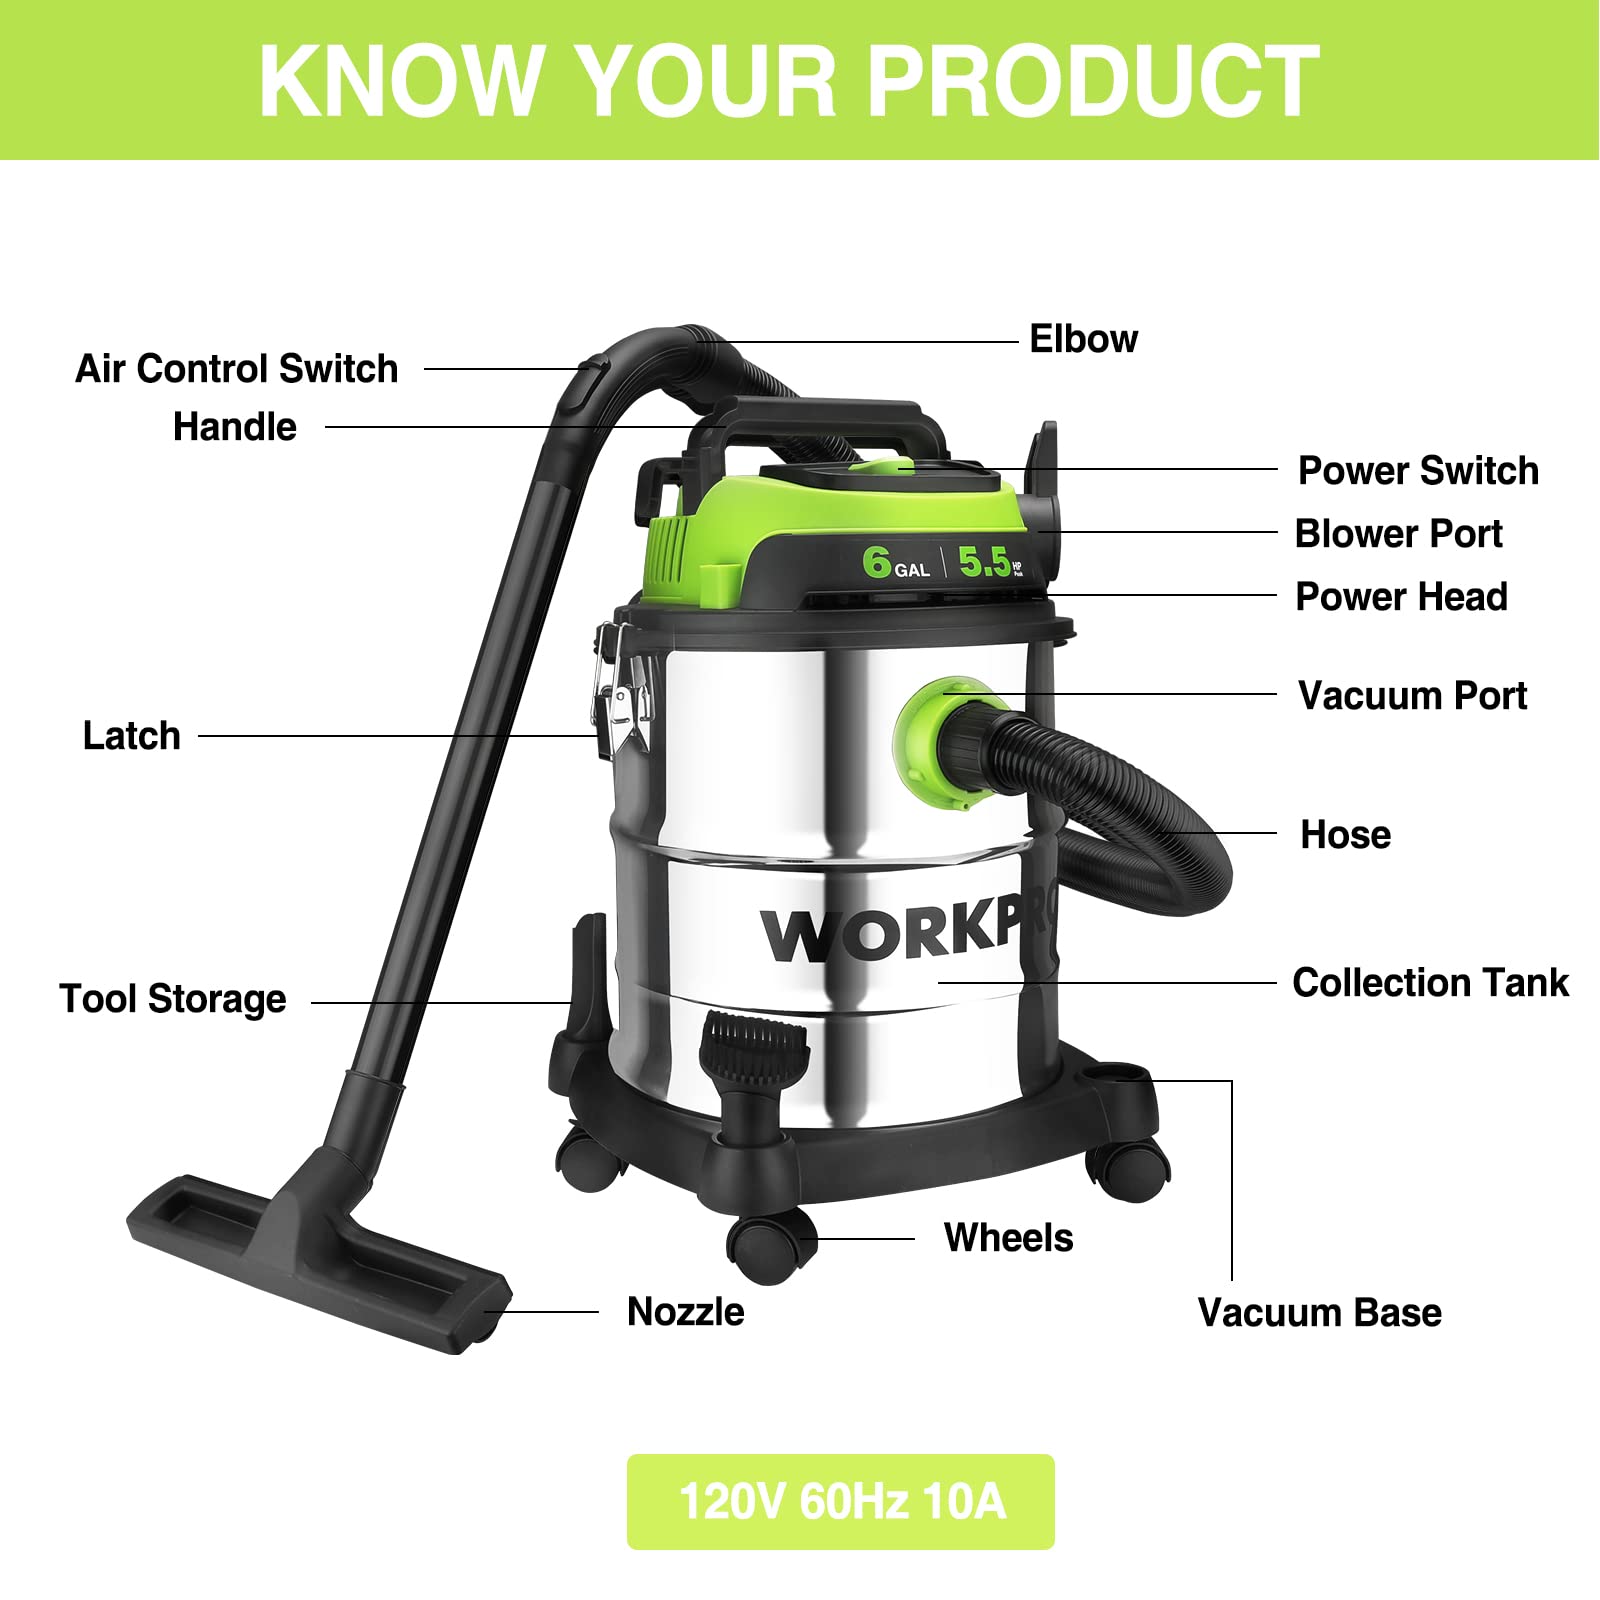 WORKPRO 6 Gallon Wet/Dry Shop Vacuum, 5.5 Peak HP Shop Vac Cleaner with HEPA Filter, Hose and Accessories for Home/Jobsite Dust Collection